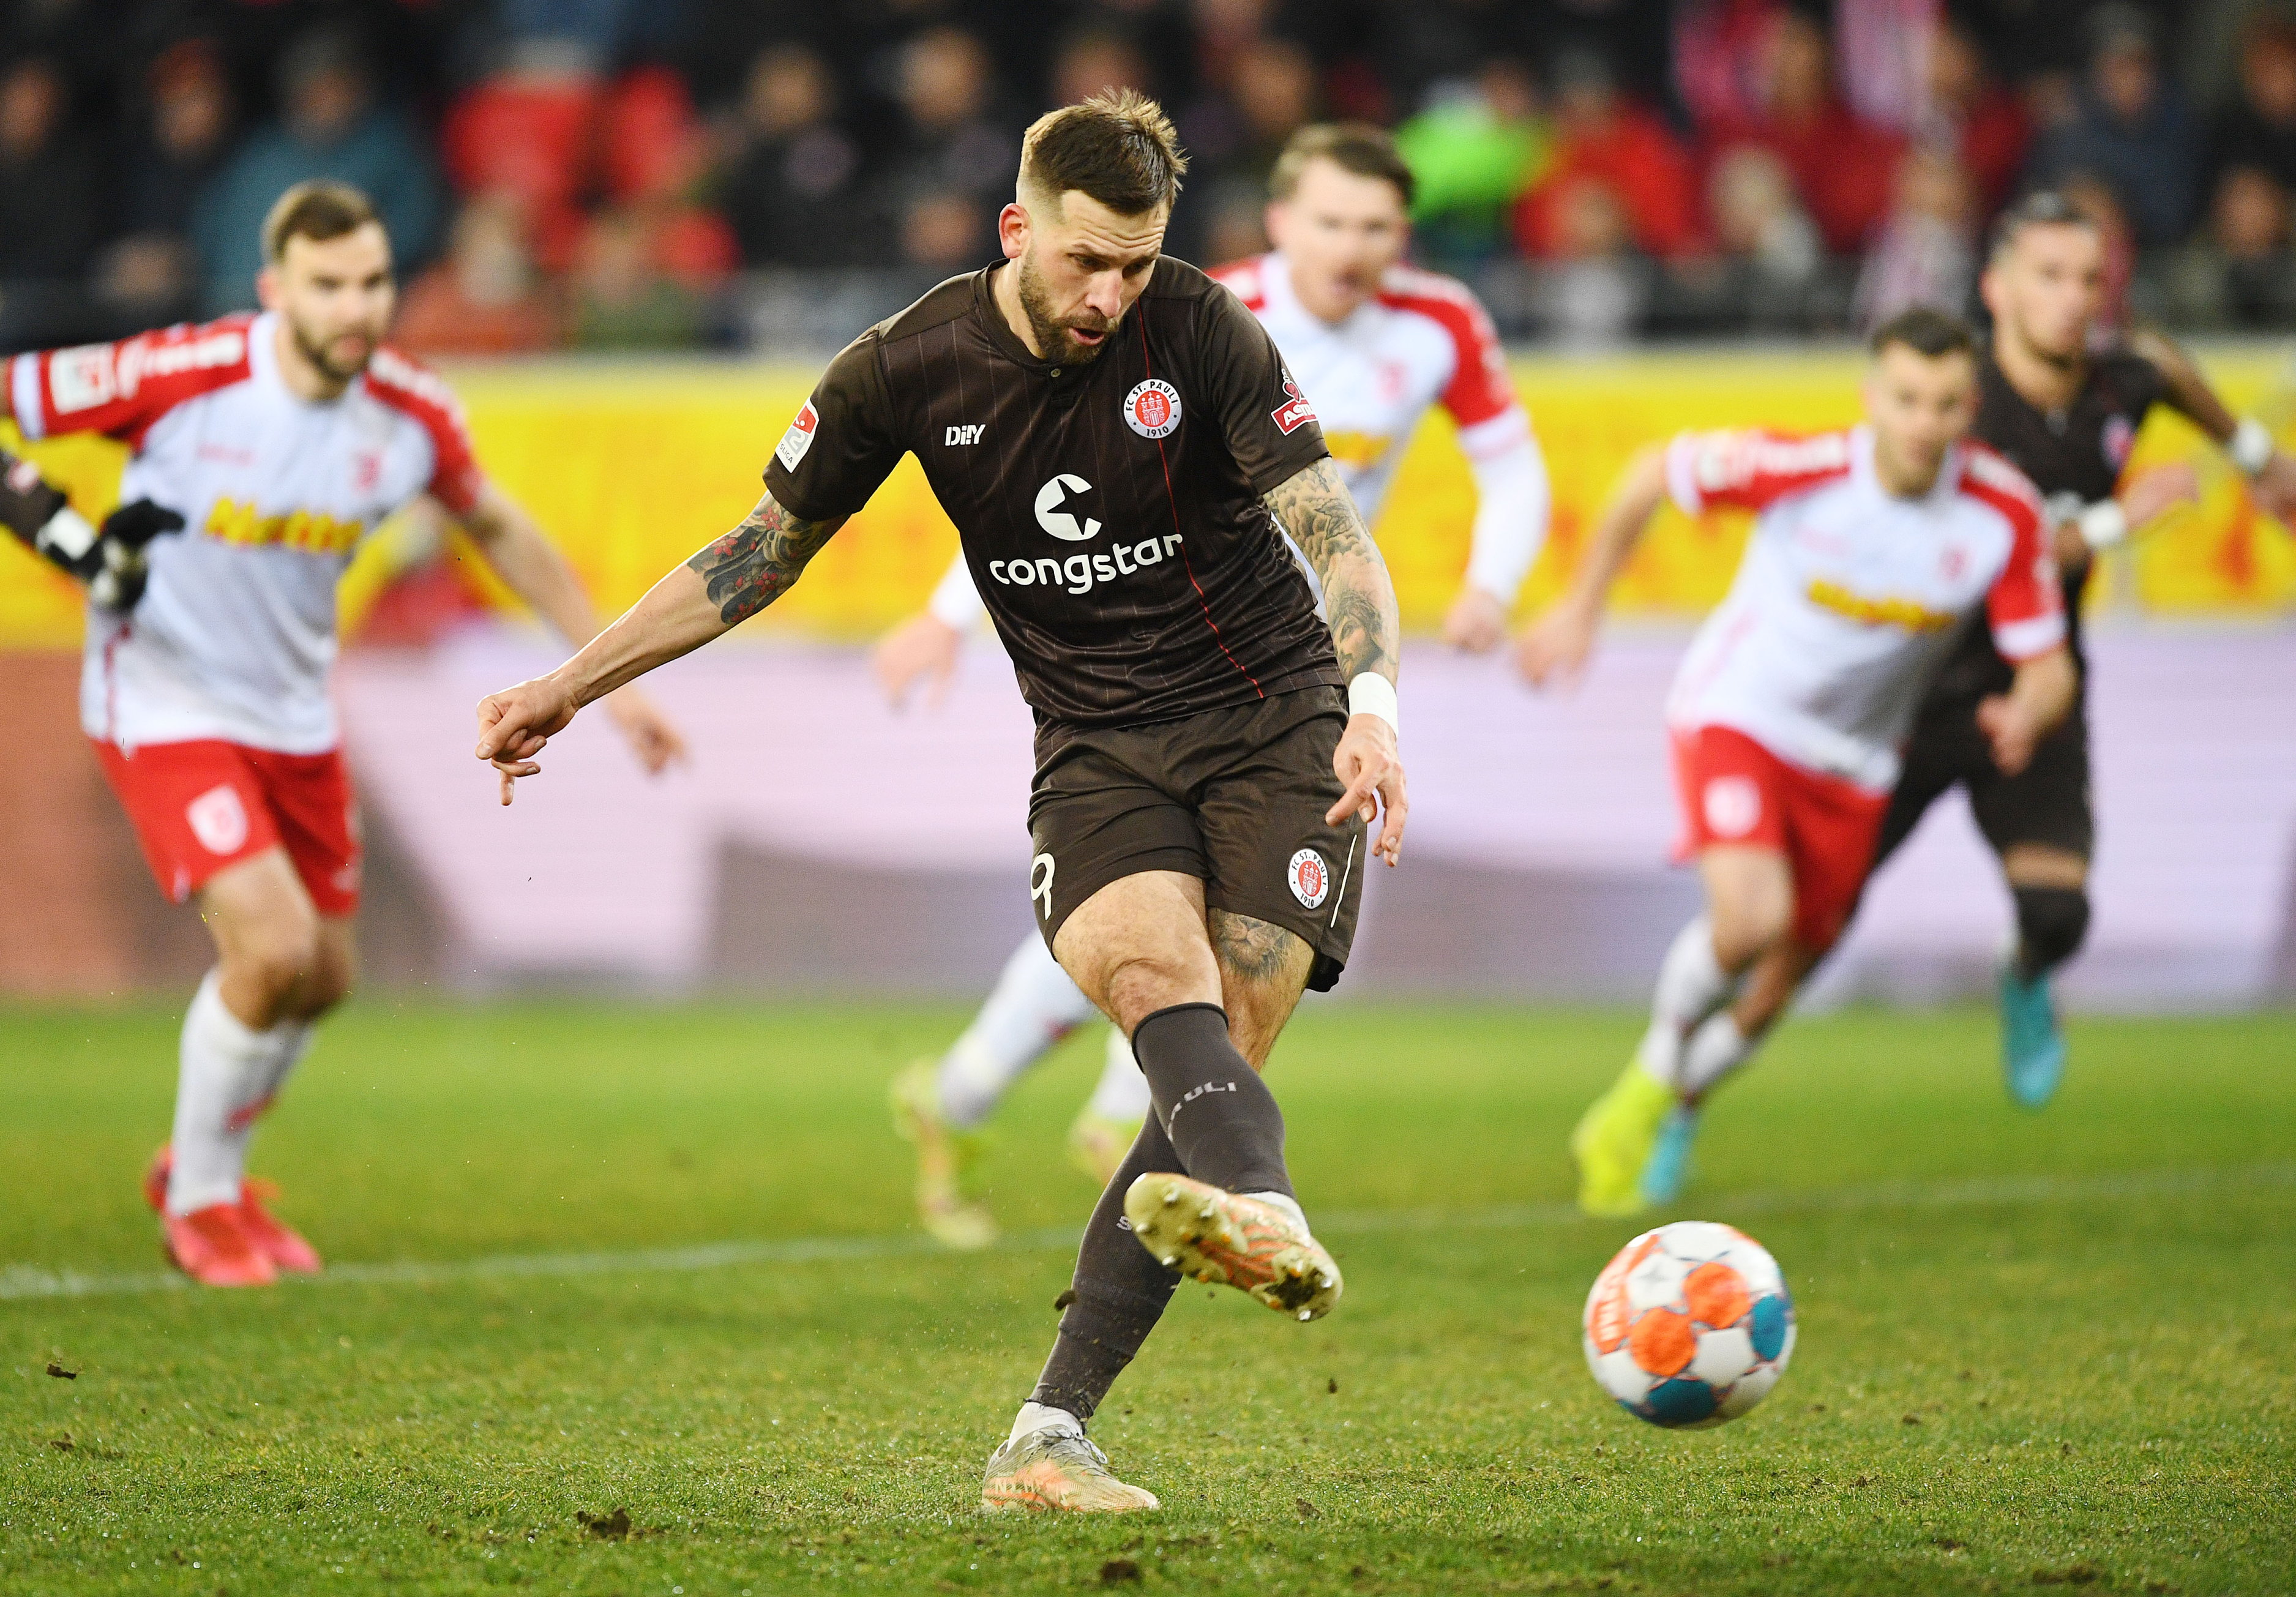 Guido Burgstaller kept a cool head to score from the spot, having already converted penalties against Dresden and Karlsruhe.